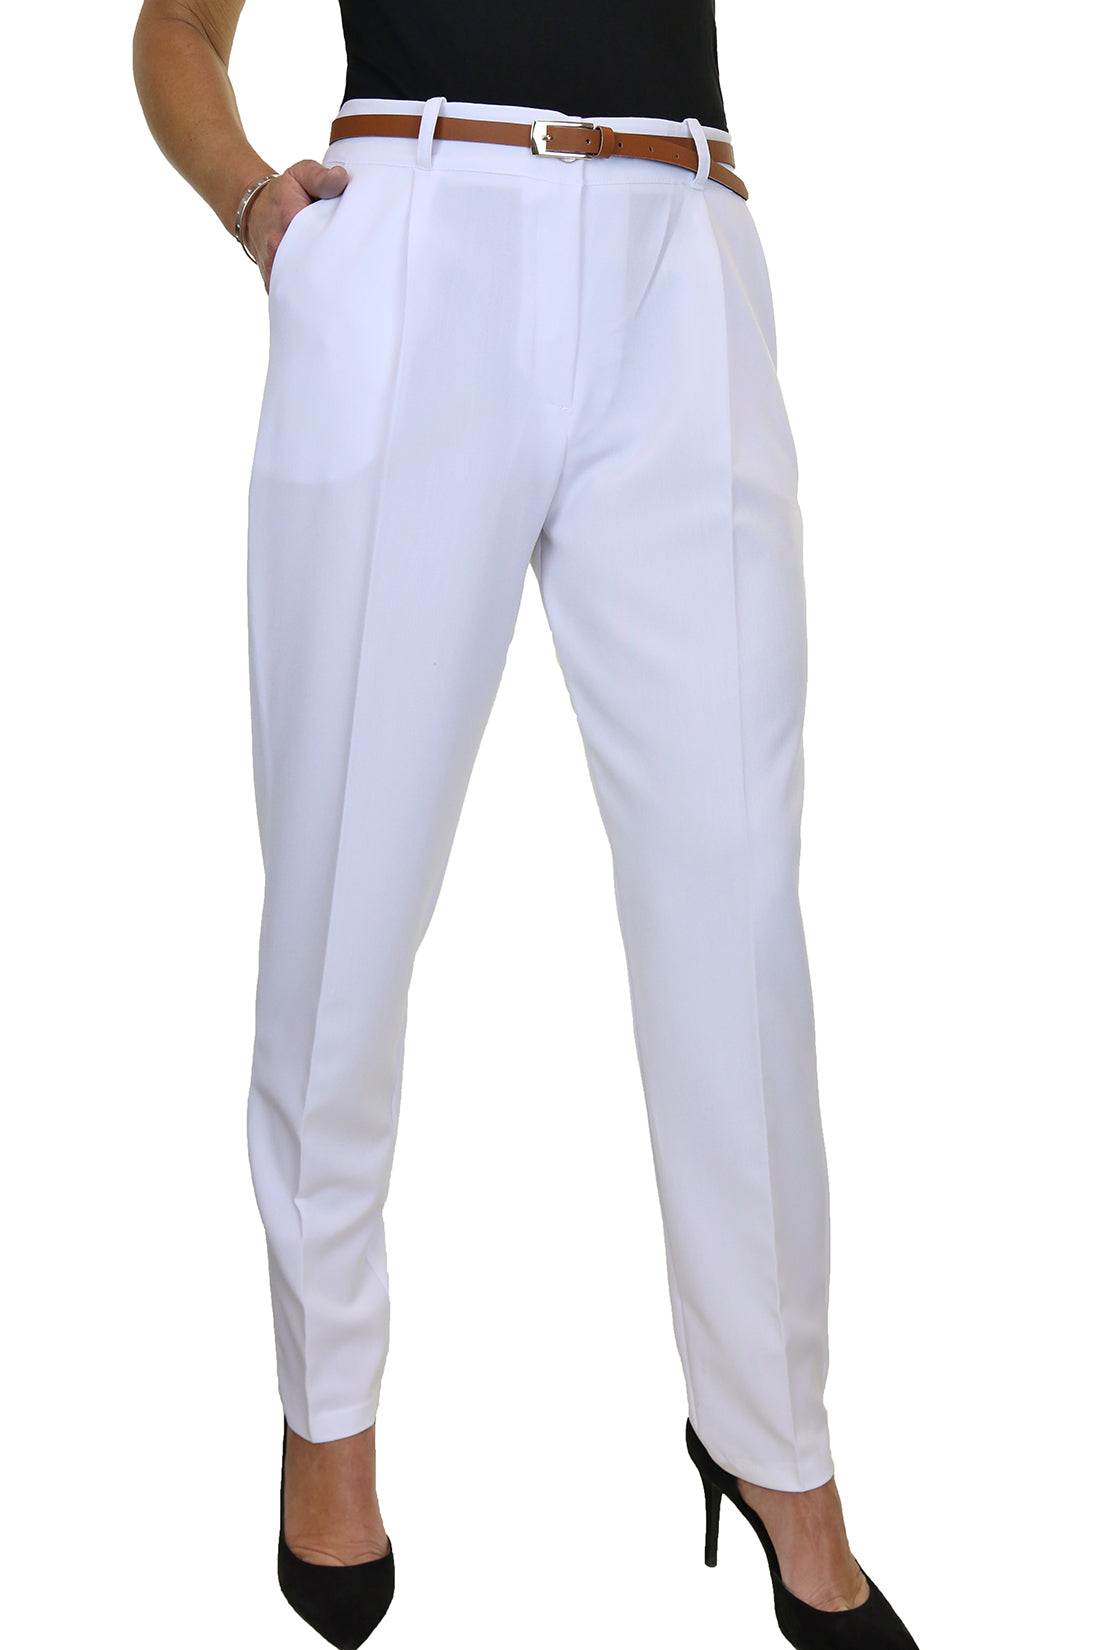 Ladies Smart Tapered Leg Trousers White